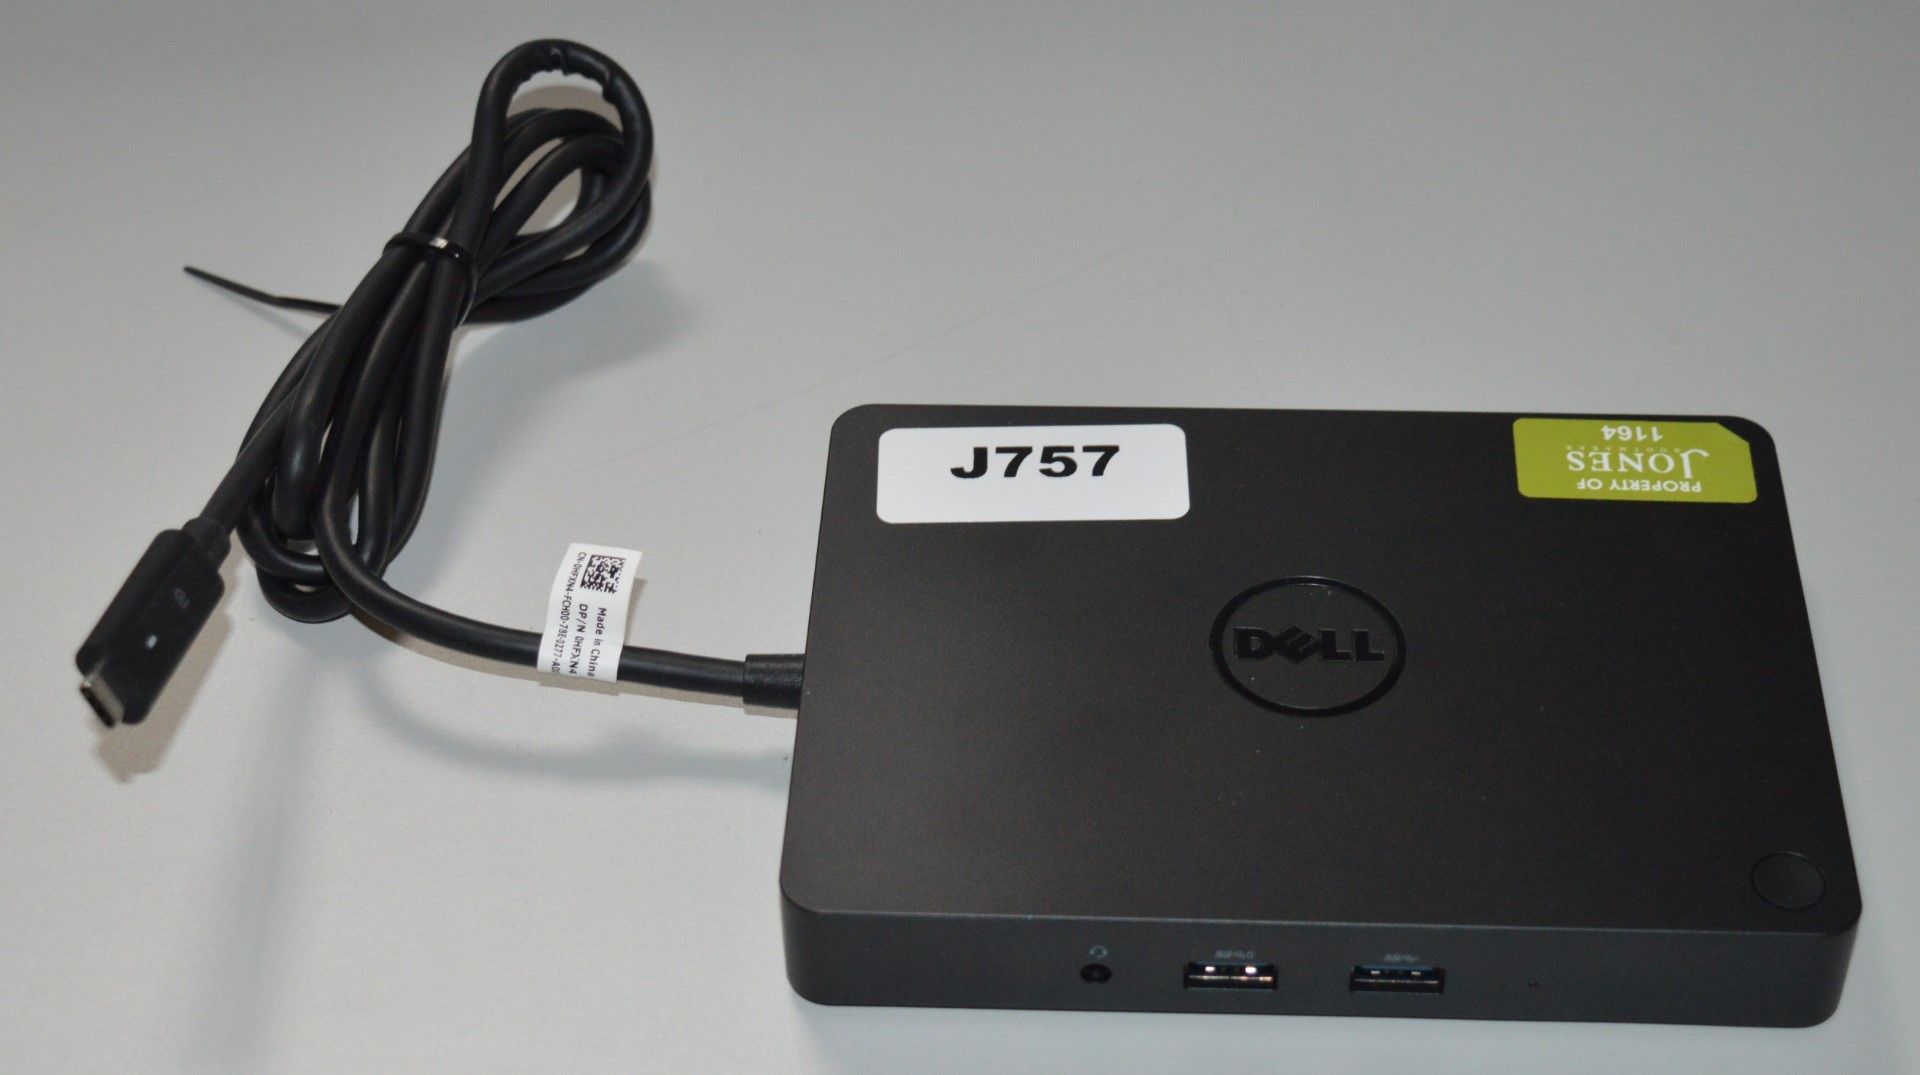 1 x Dell WD15 Laptop Dock With USB Type C Connections - CL285 - Ref J757 - Location: Altrincham - Image 2 of 5